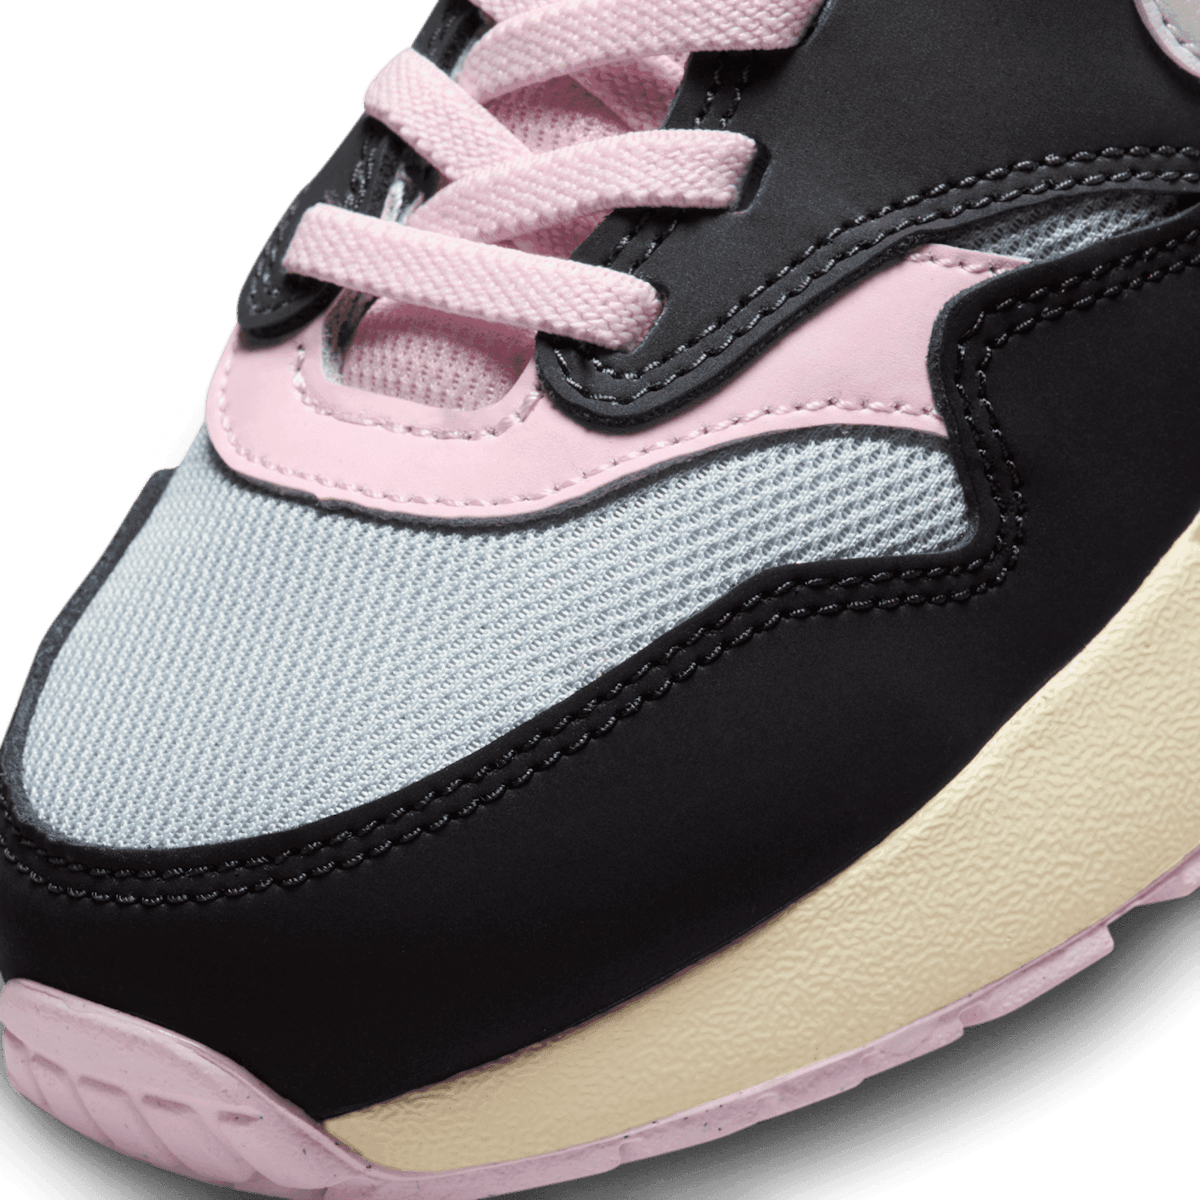 Nike Air Max 1 Black Anthracite Pink Foam (PS) Angle 4